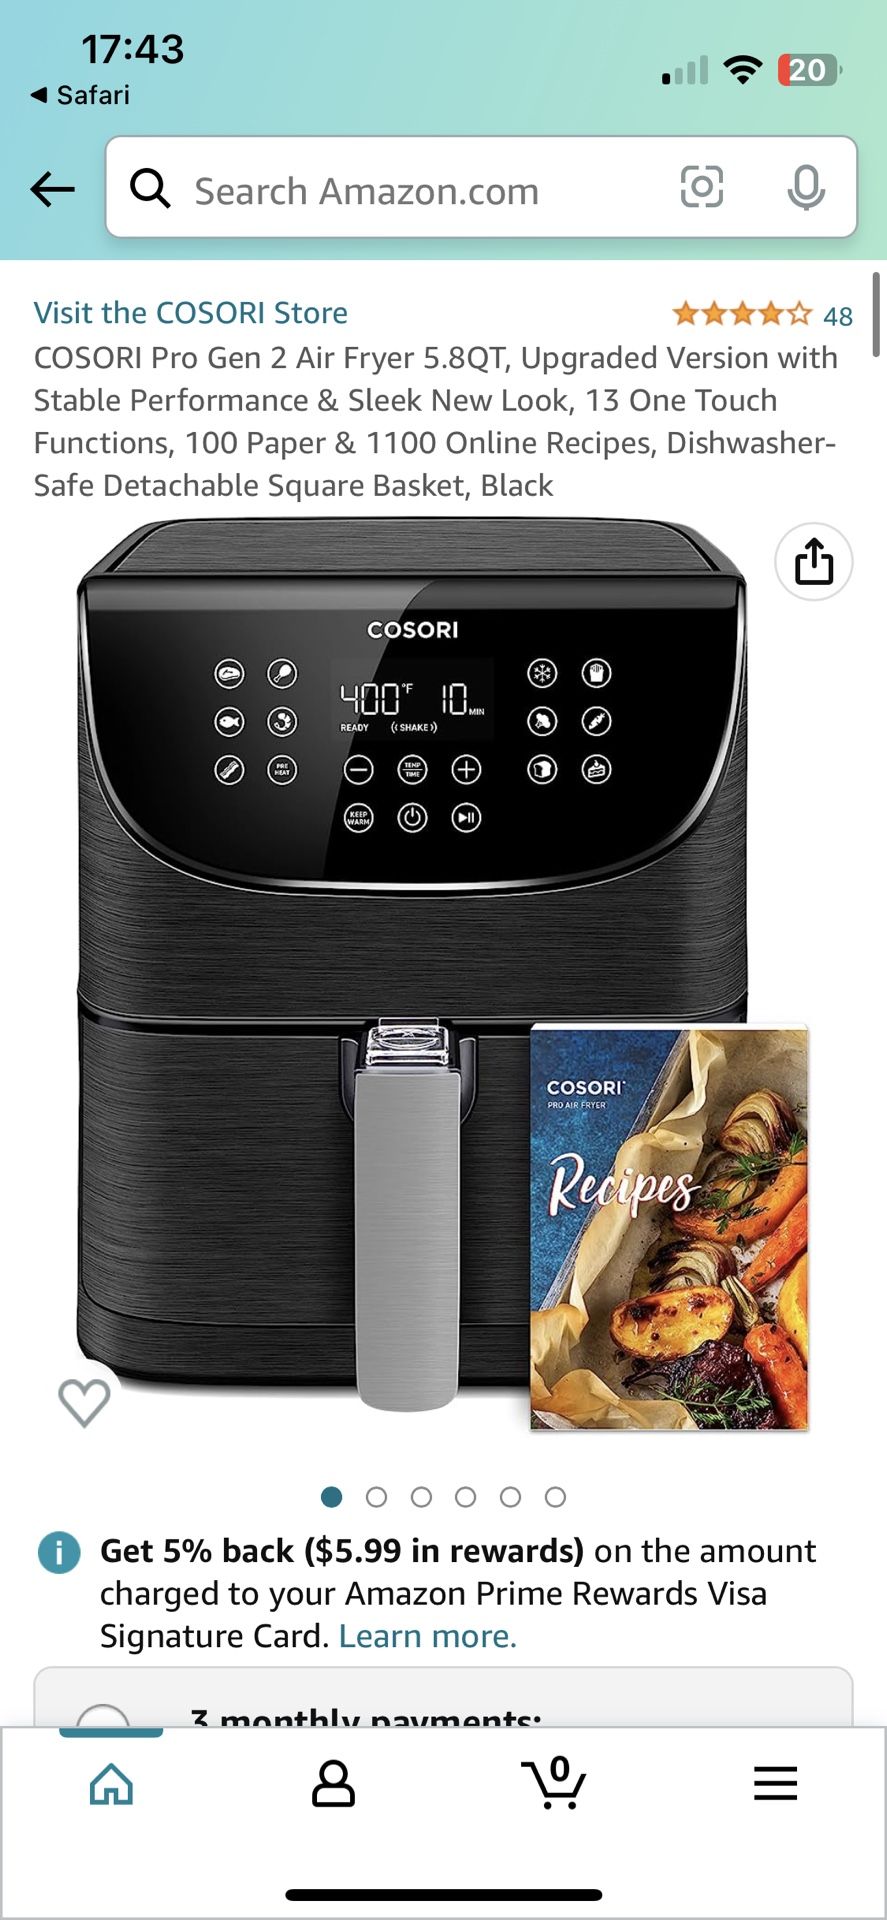 COSORI Pro Gen 2 Air Fryer 5.8QT, Upgraded Version with Stable Performance  & Sleek New Look, 13 One Touch Functions, 100 Paper & 1100 Online Recipes,  for Sale in San Diego, CA - OfferUp